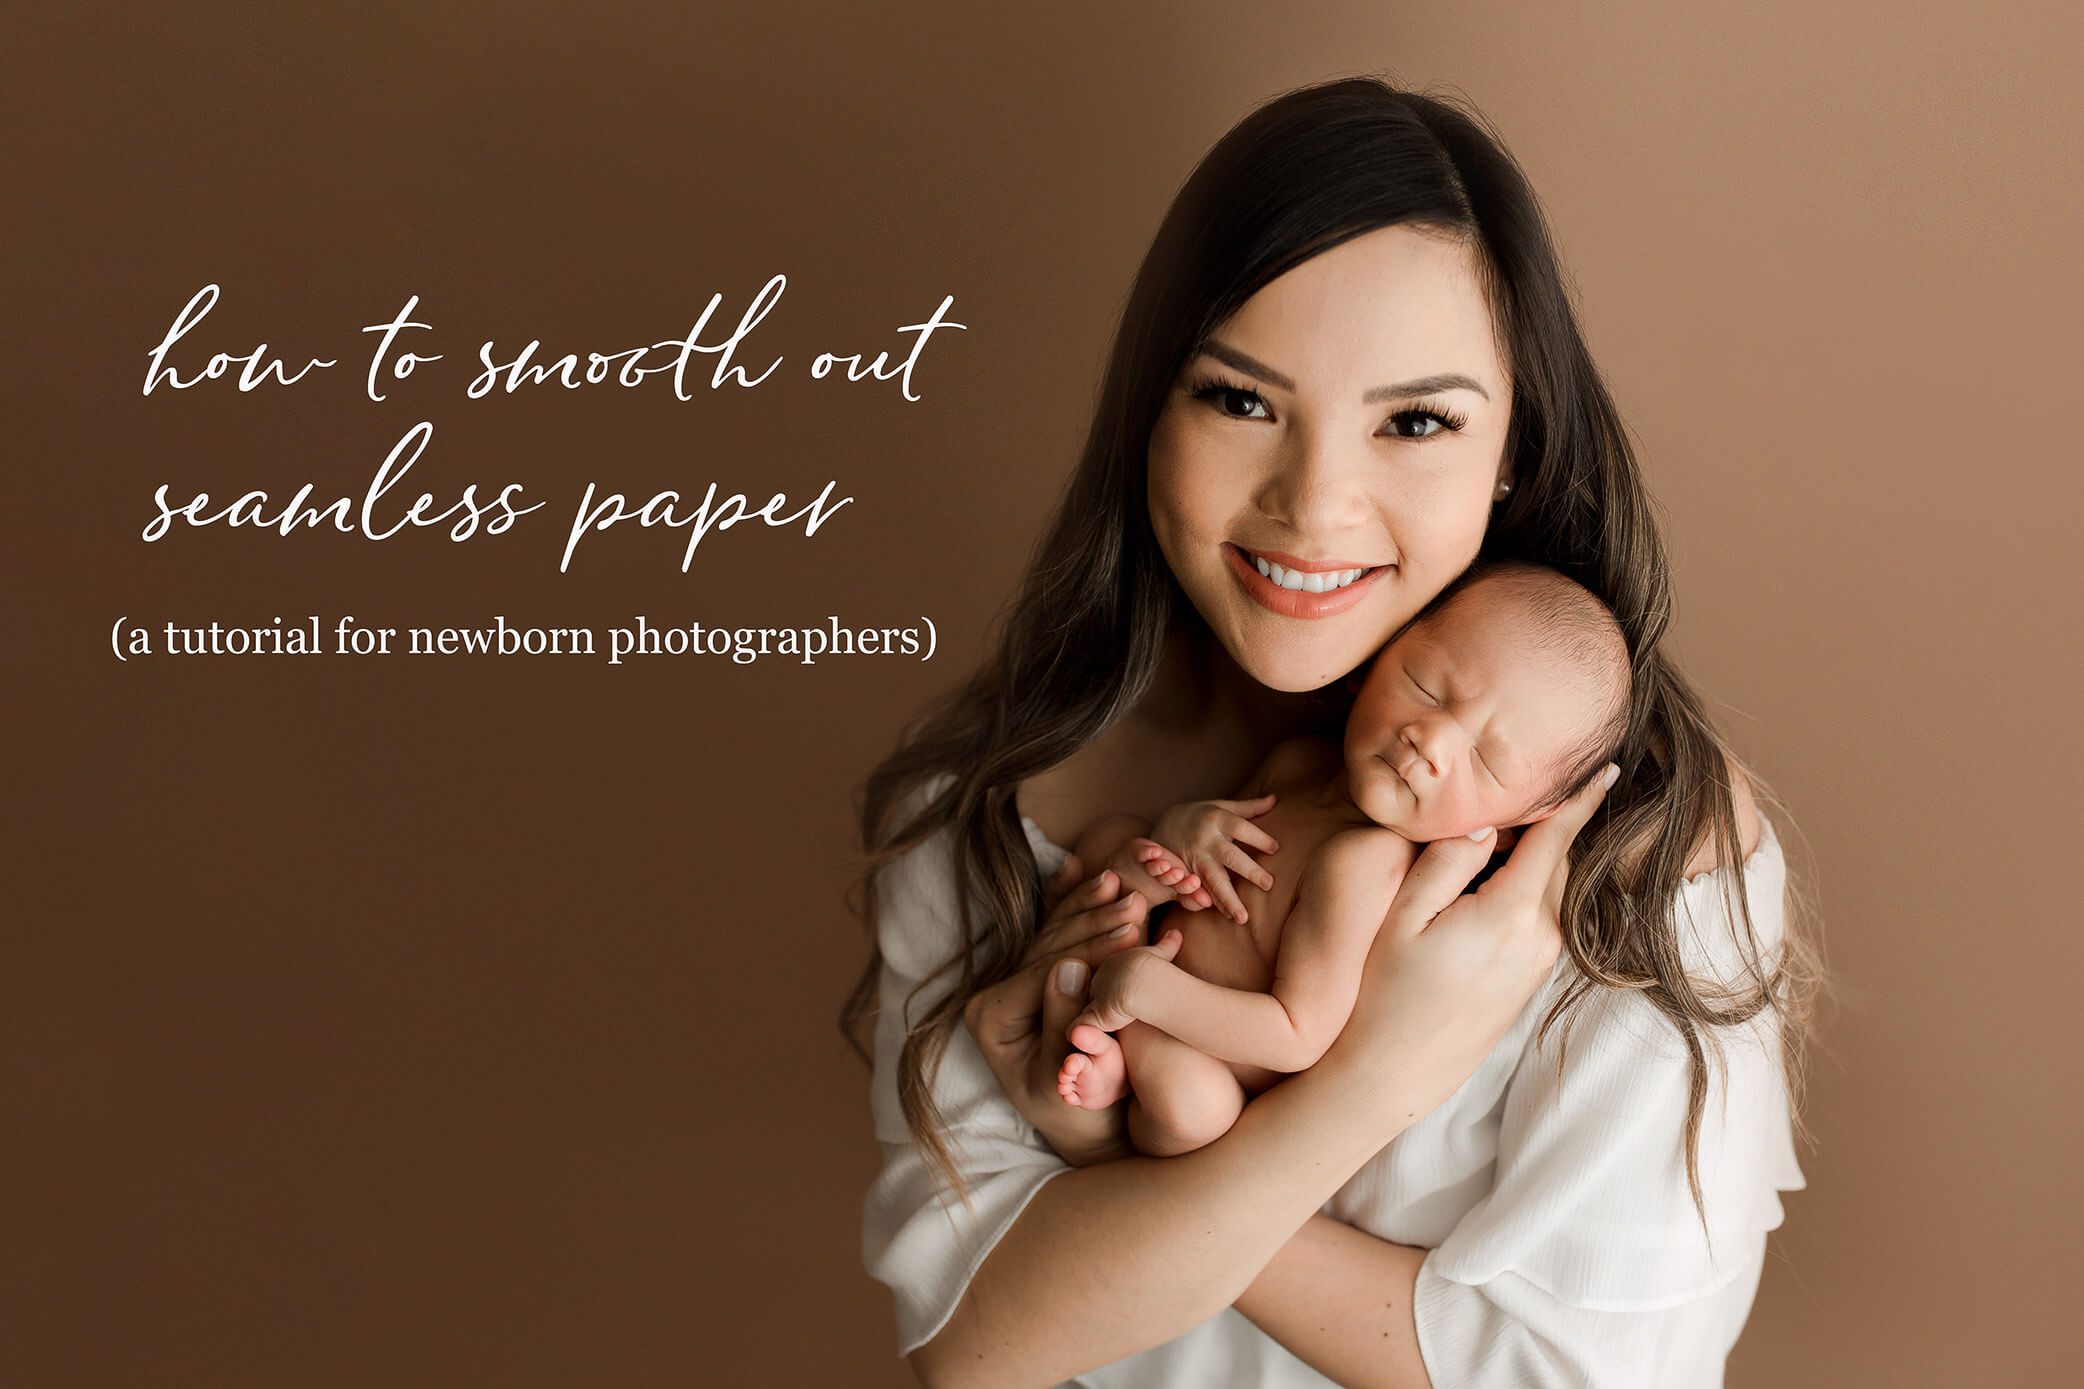 How To Smooth Seamless Paper in Photoshop - Newborn Photography Tip